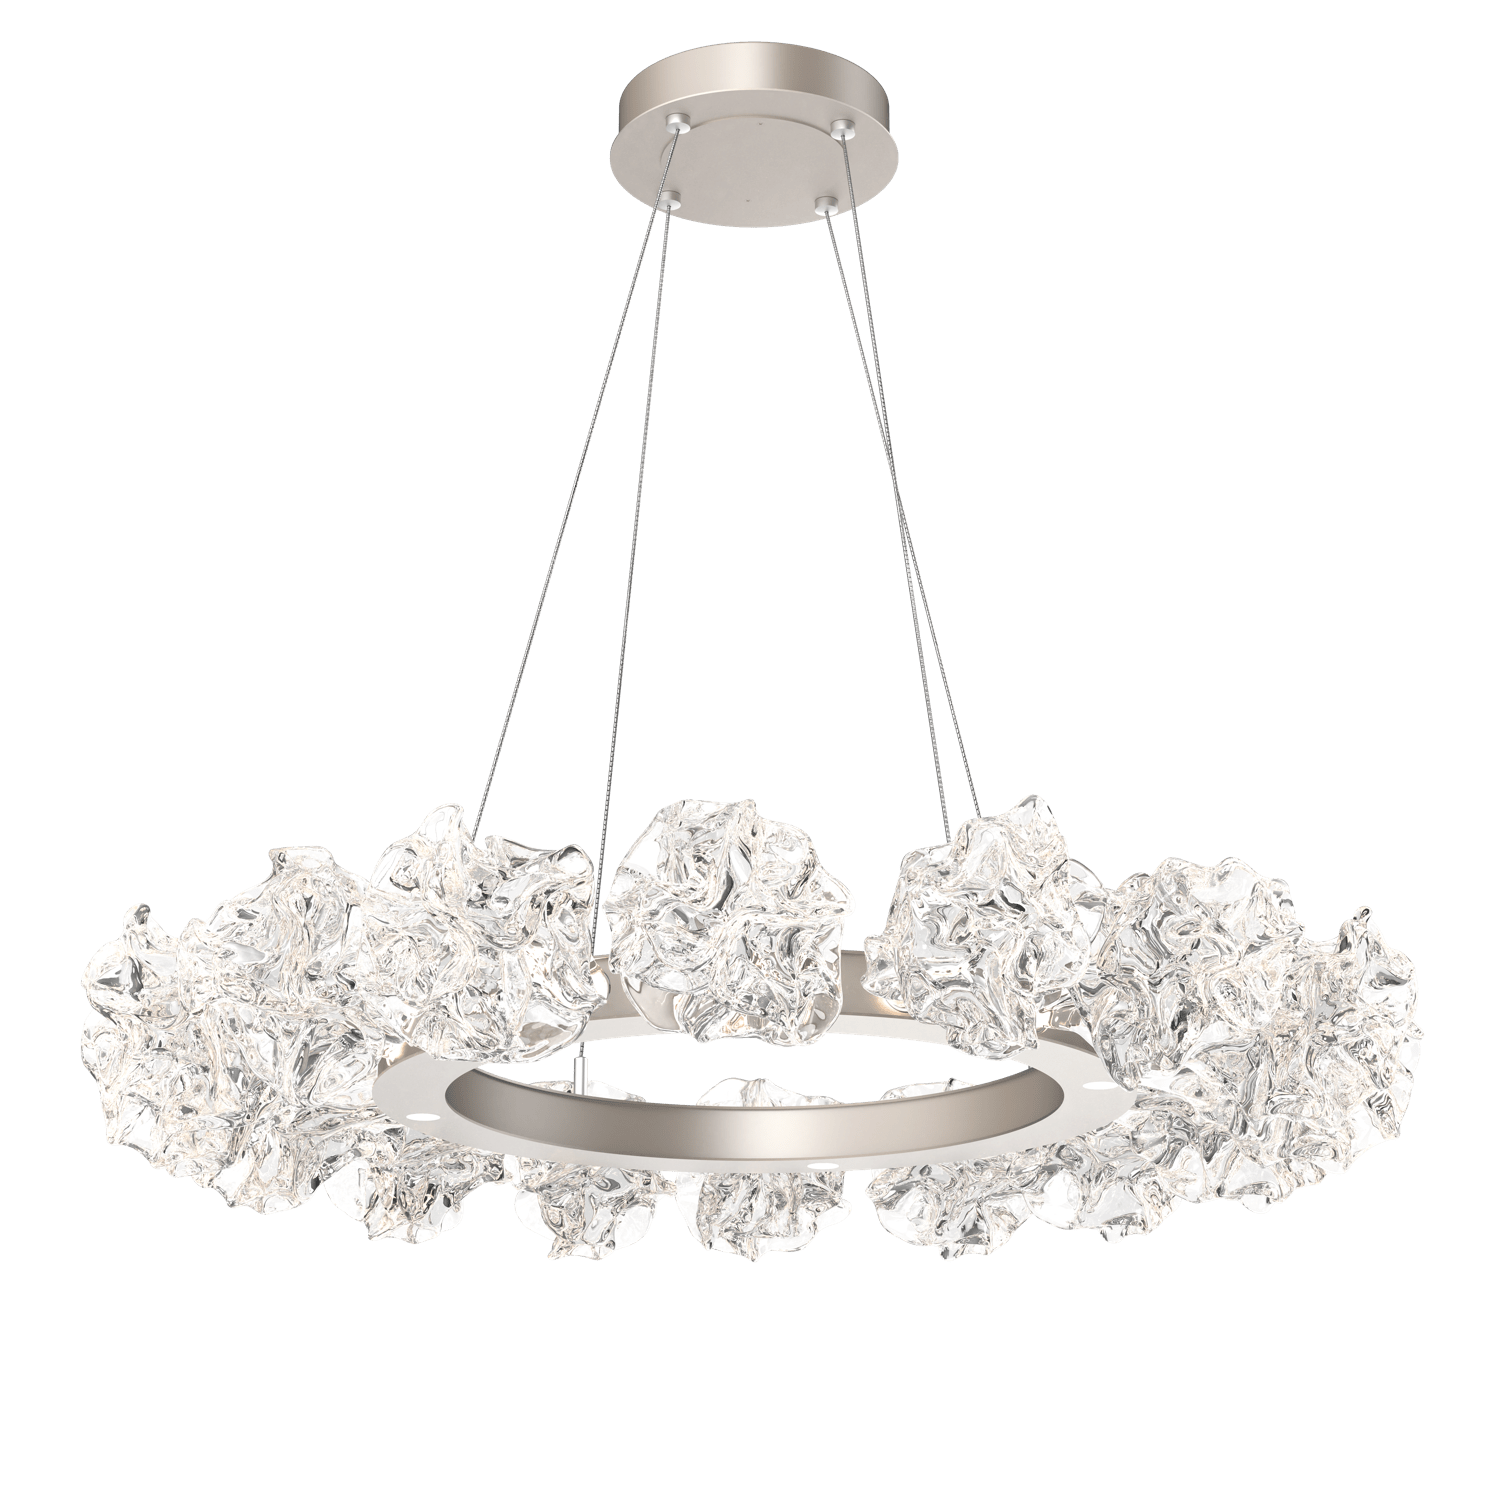 CHB0059-36-BS-Hammerton-Studio-Blossom-36-inch-radial-ring-chandelier-with-metallic-beige-silver-finish-and-clear-handblown-crystal-glass-shades-and-LED-lamping